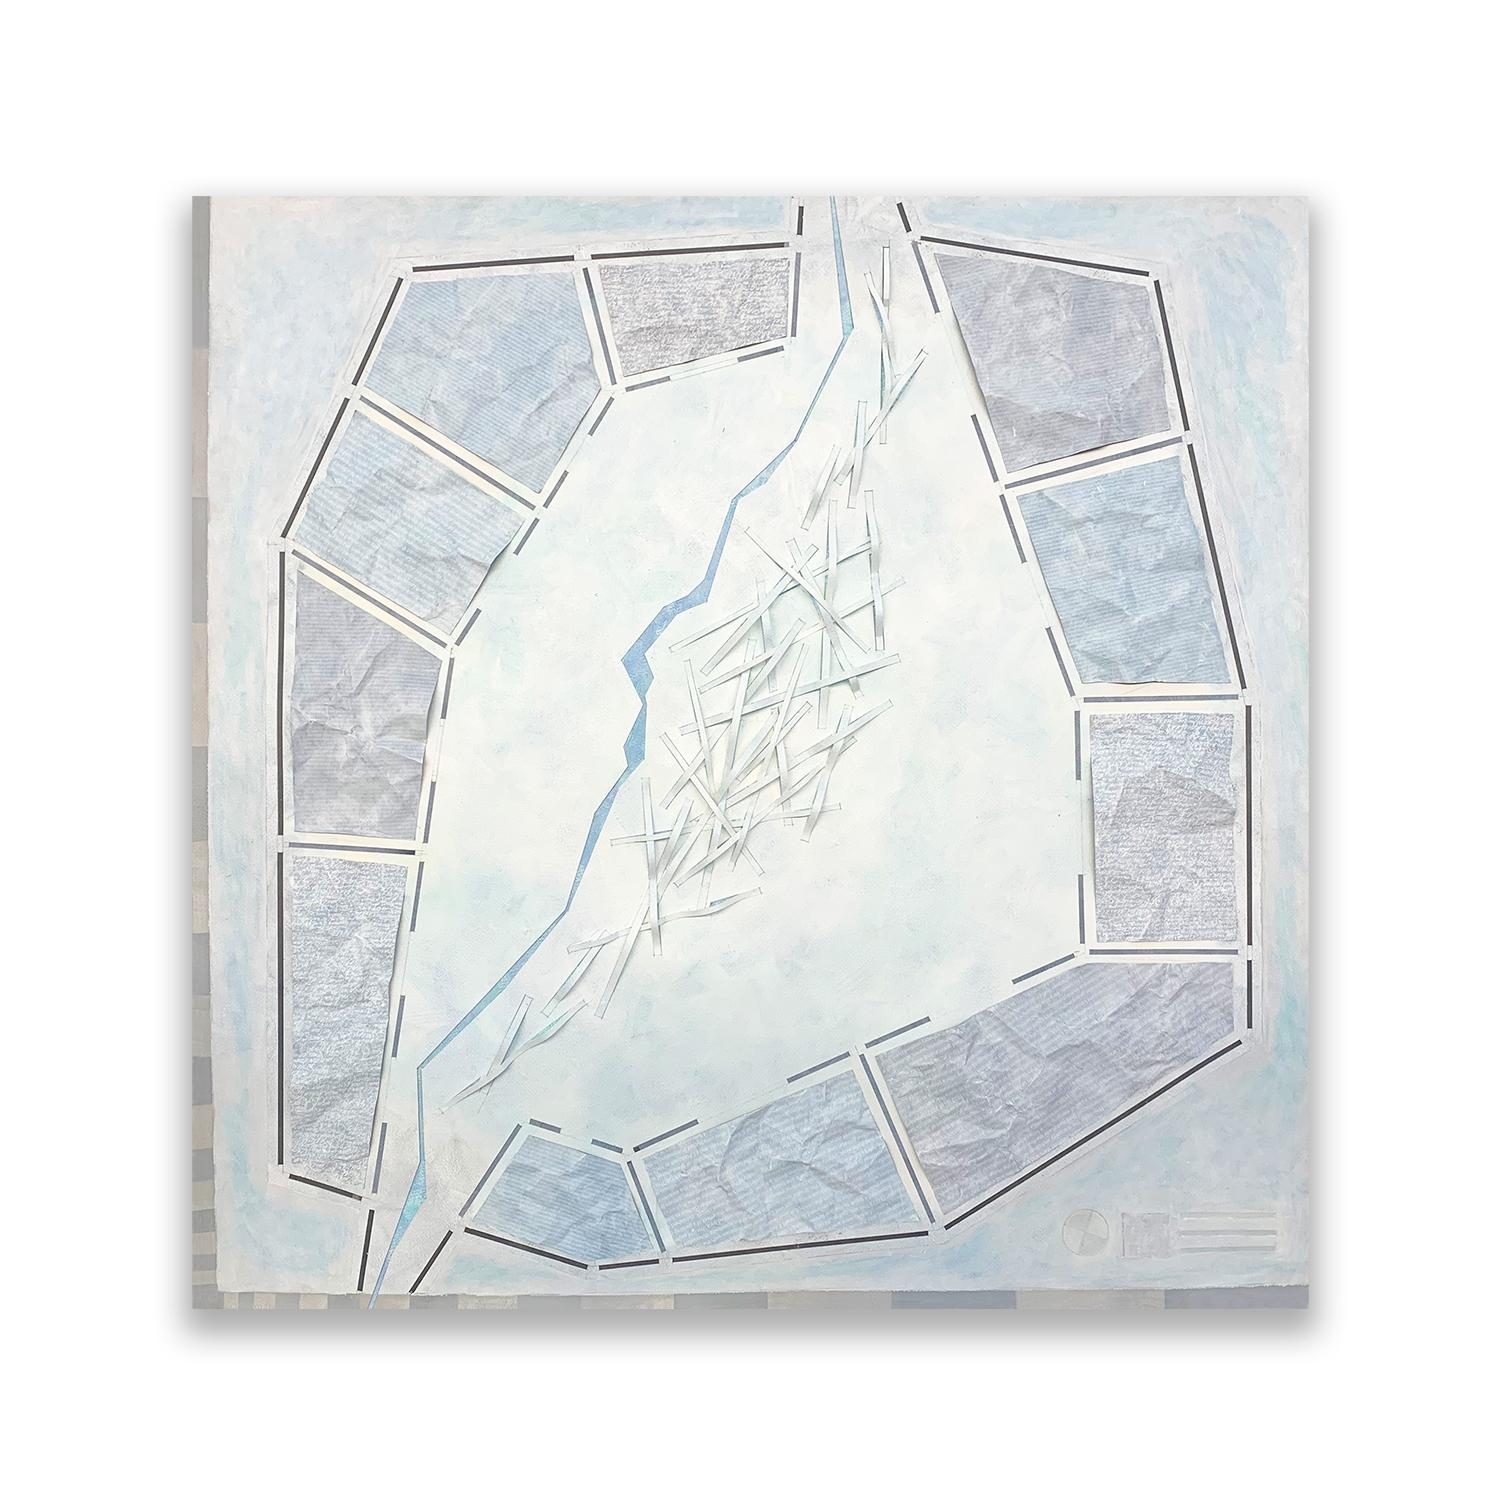 Architect John Anderson uses different materials including Acrylic paint, inkjet prints, graphite, and colored pencil on paper to create a collage-style map that shows a polar research settlement on warming and changing ice shelves.